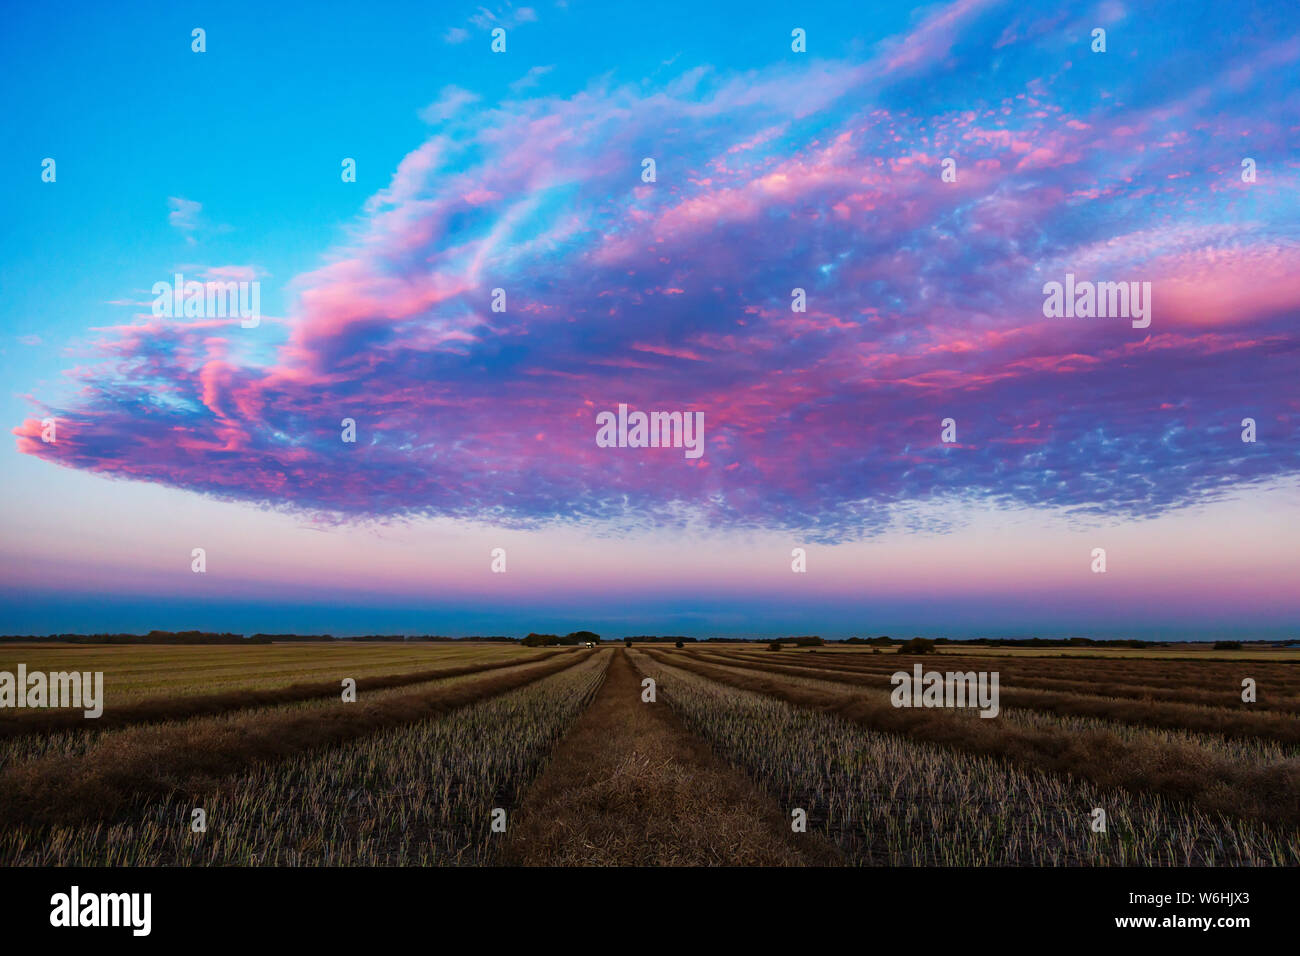 Swathed canola field at sunset with glowing pink clouds; Legal, Alberta, Canada Stock Photo